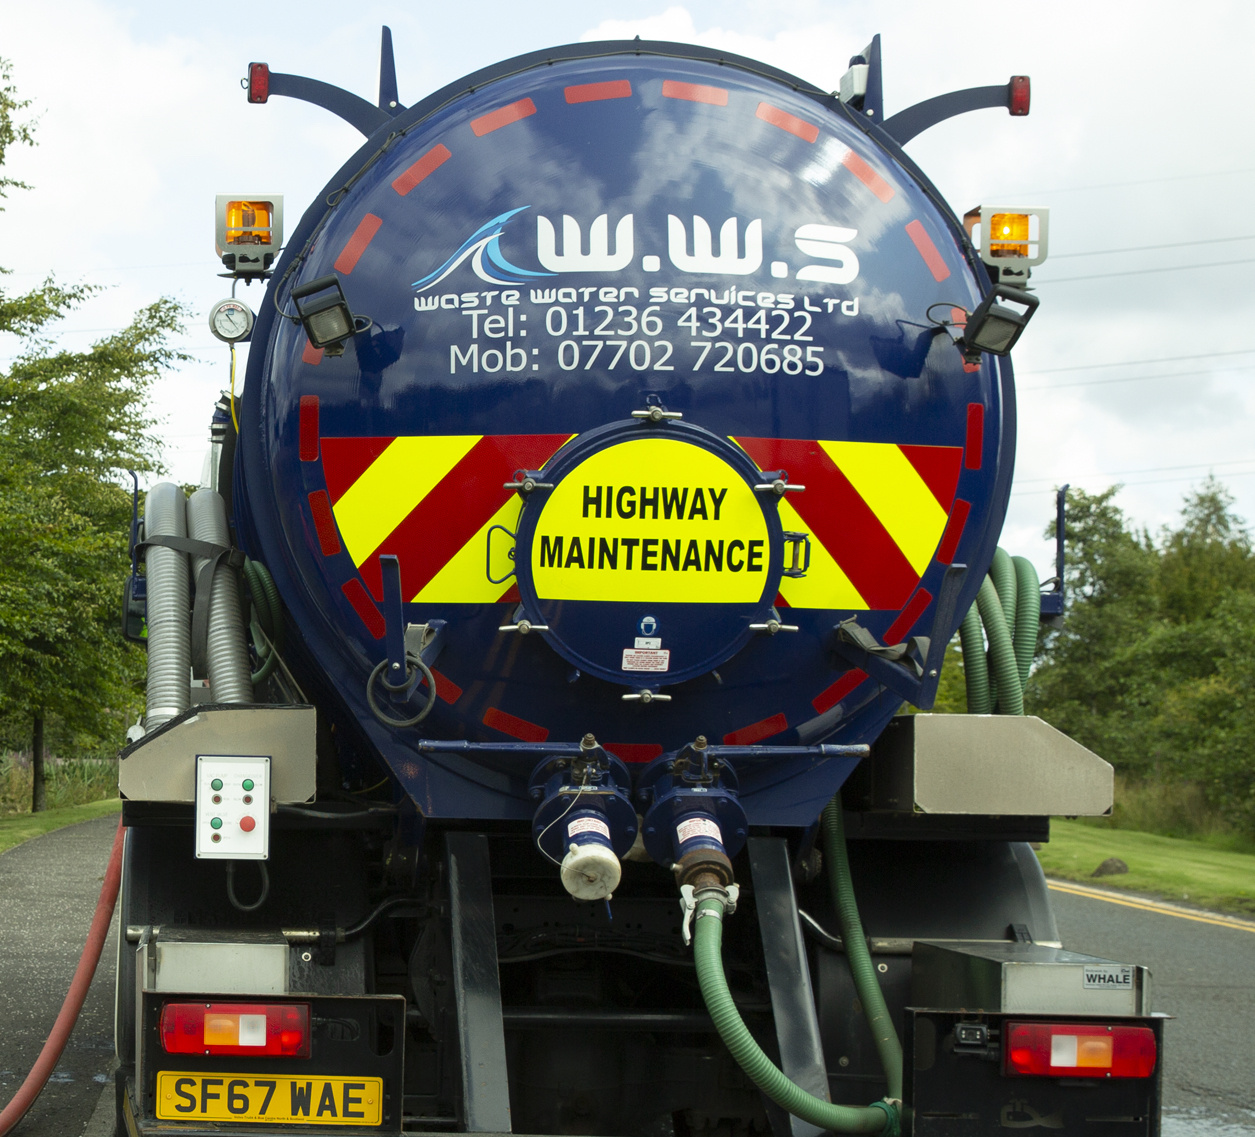 waste water services lorry